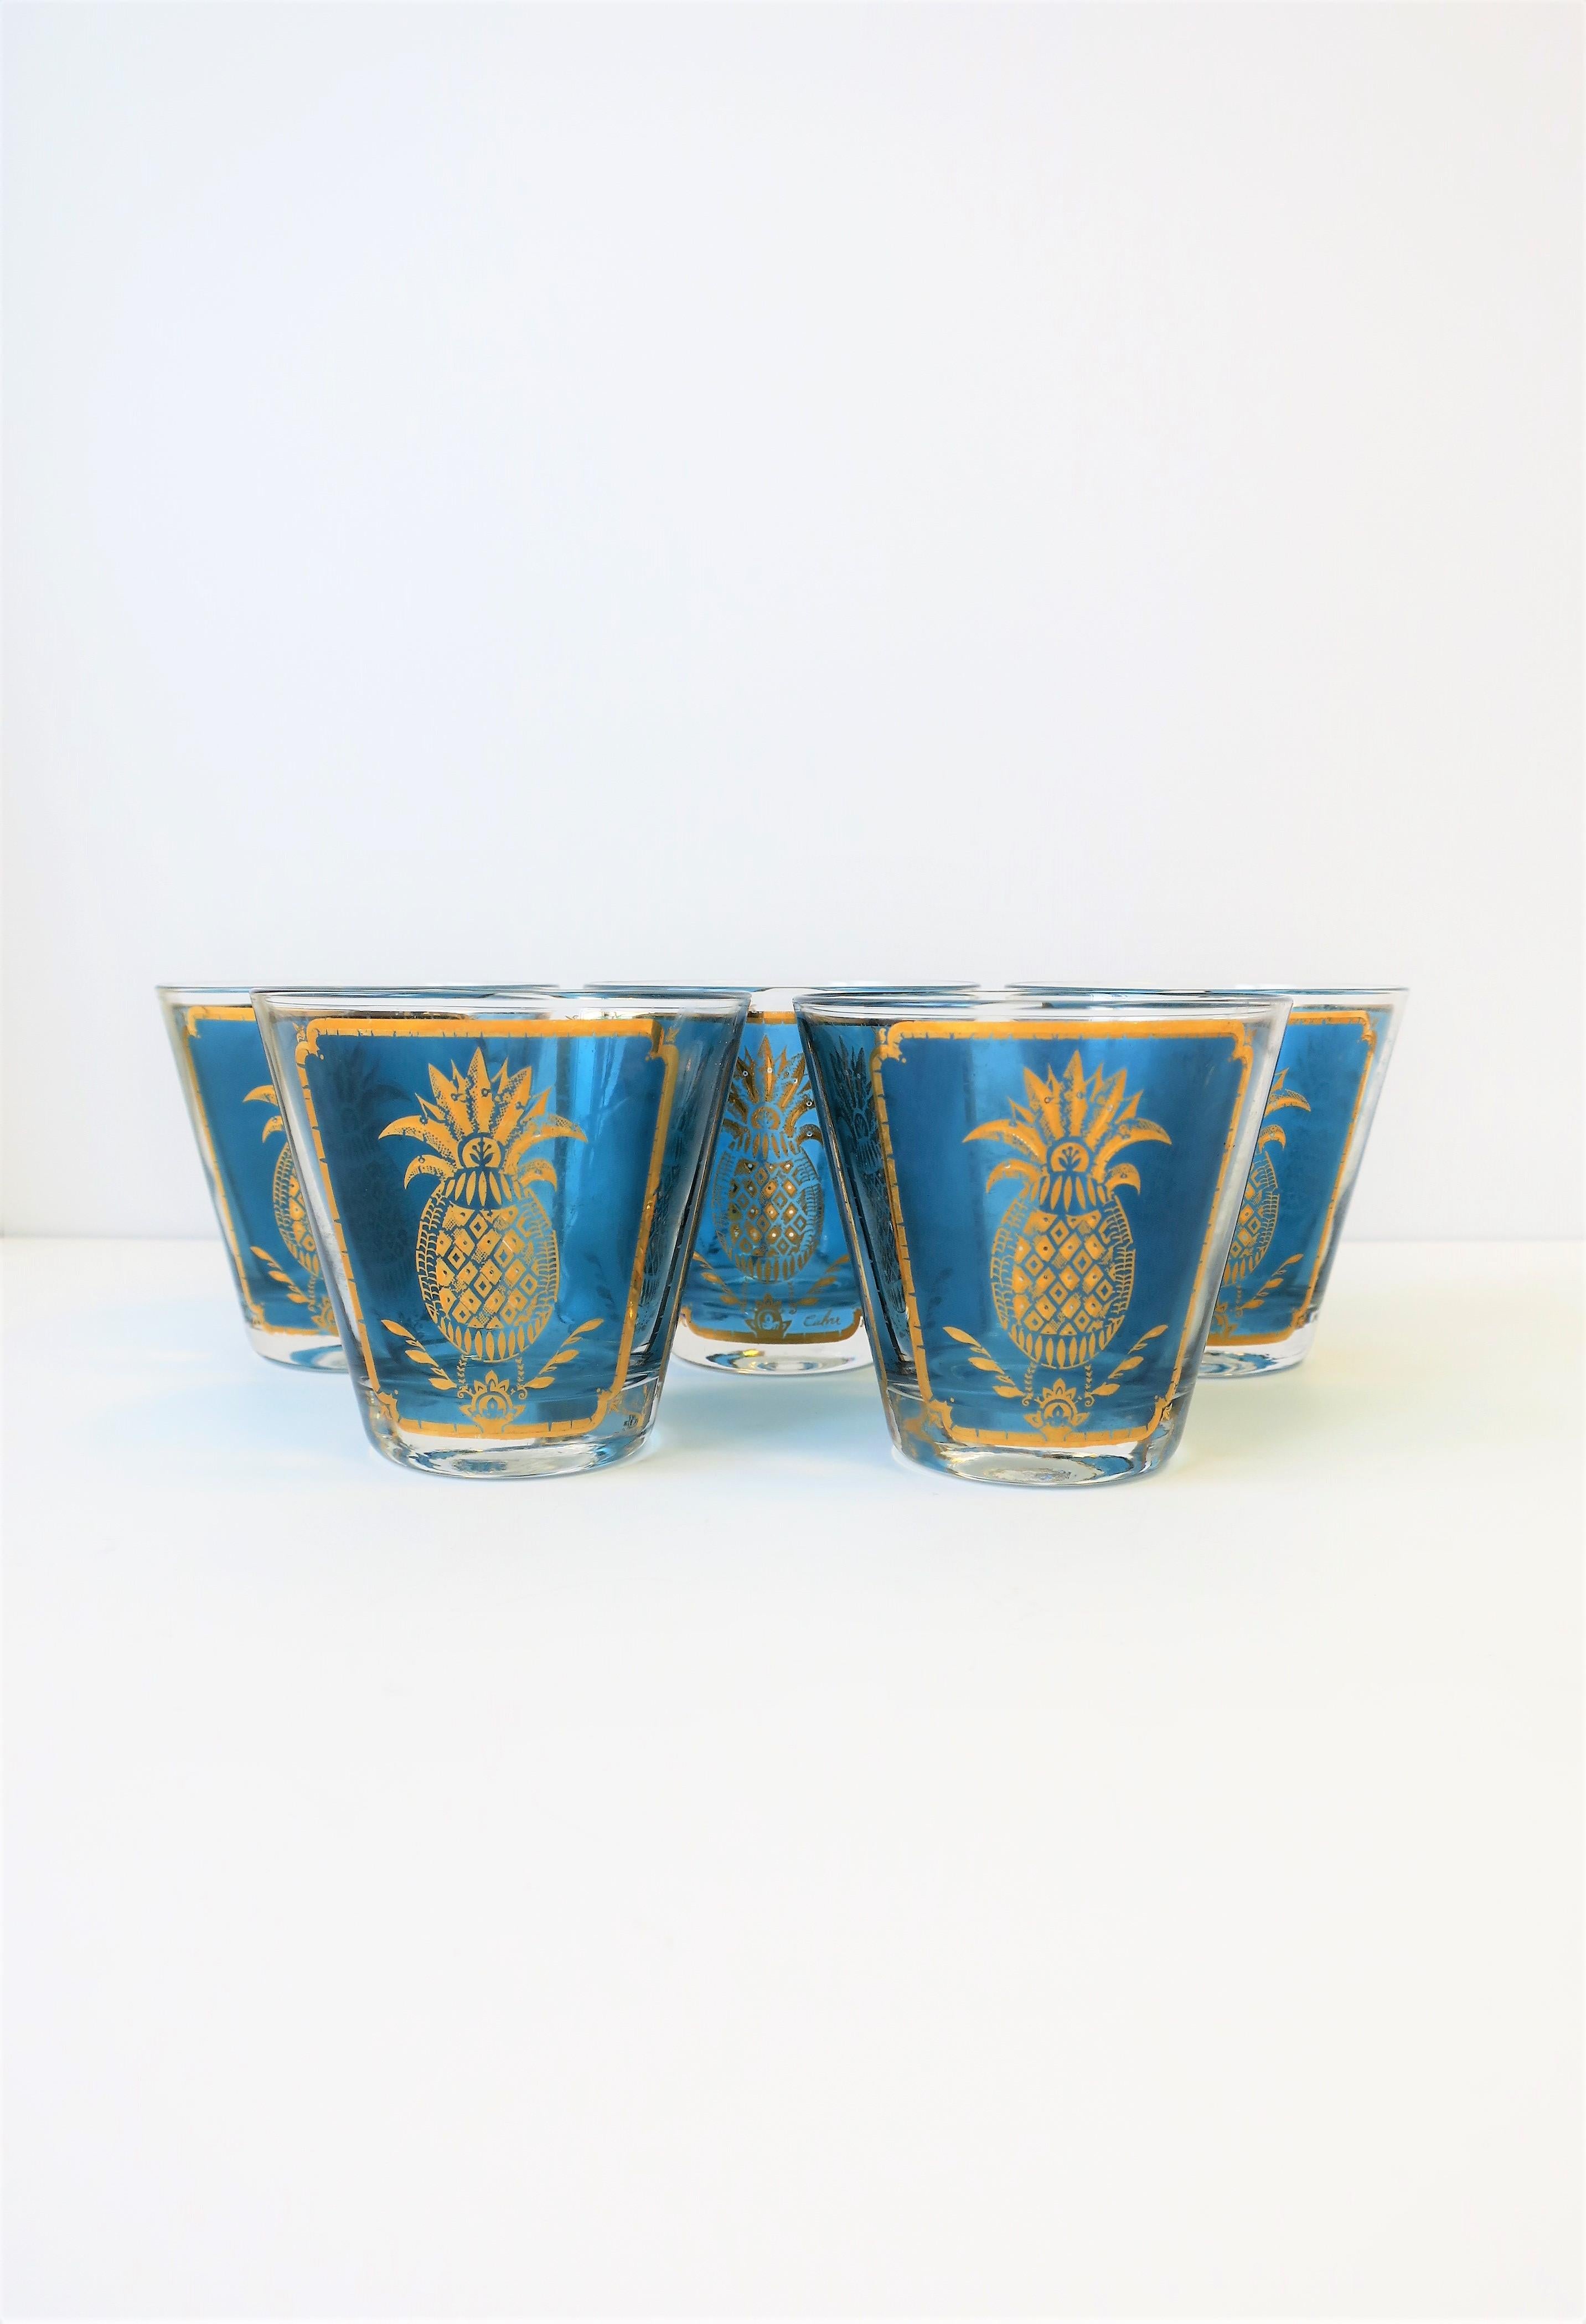 Polychromed Midcentury Blue and Gold Rocks Cocktail Glasses with Pineapple Design